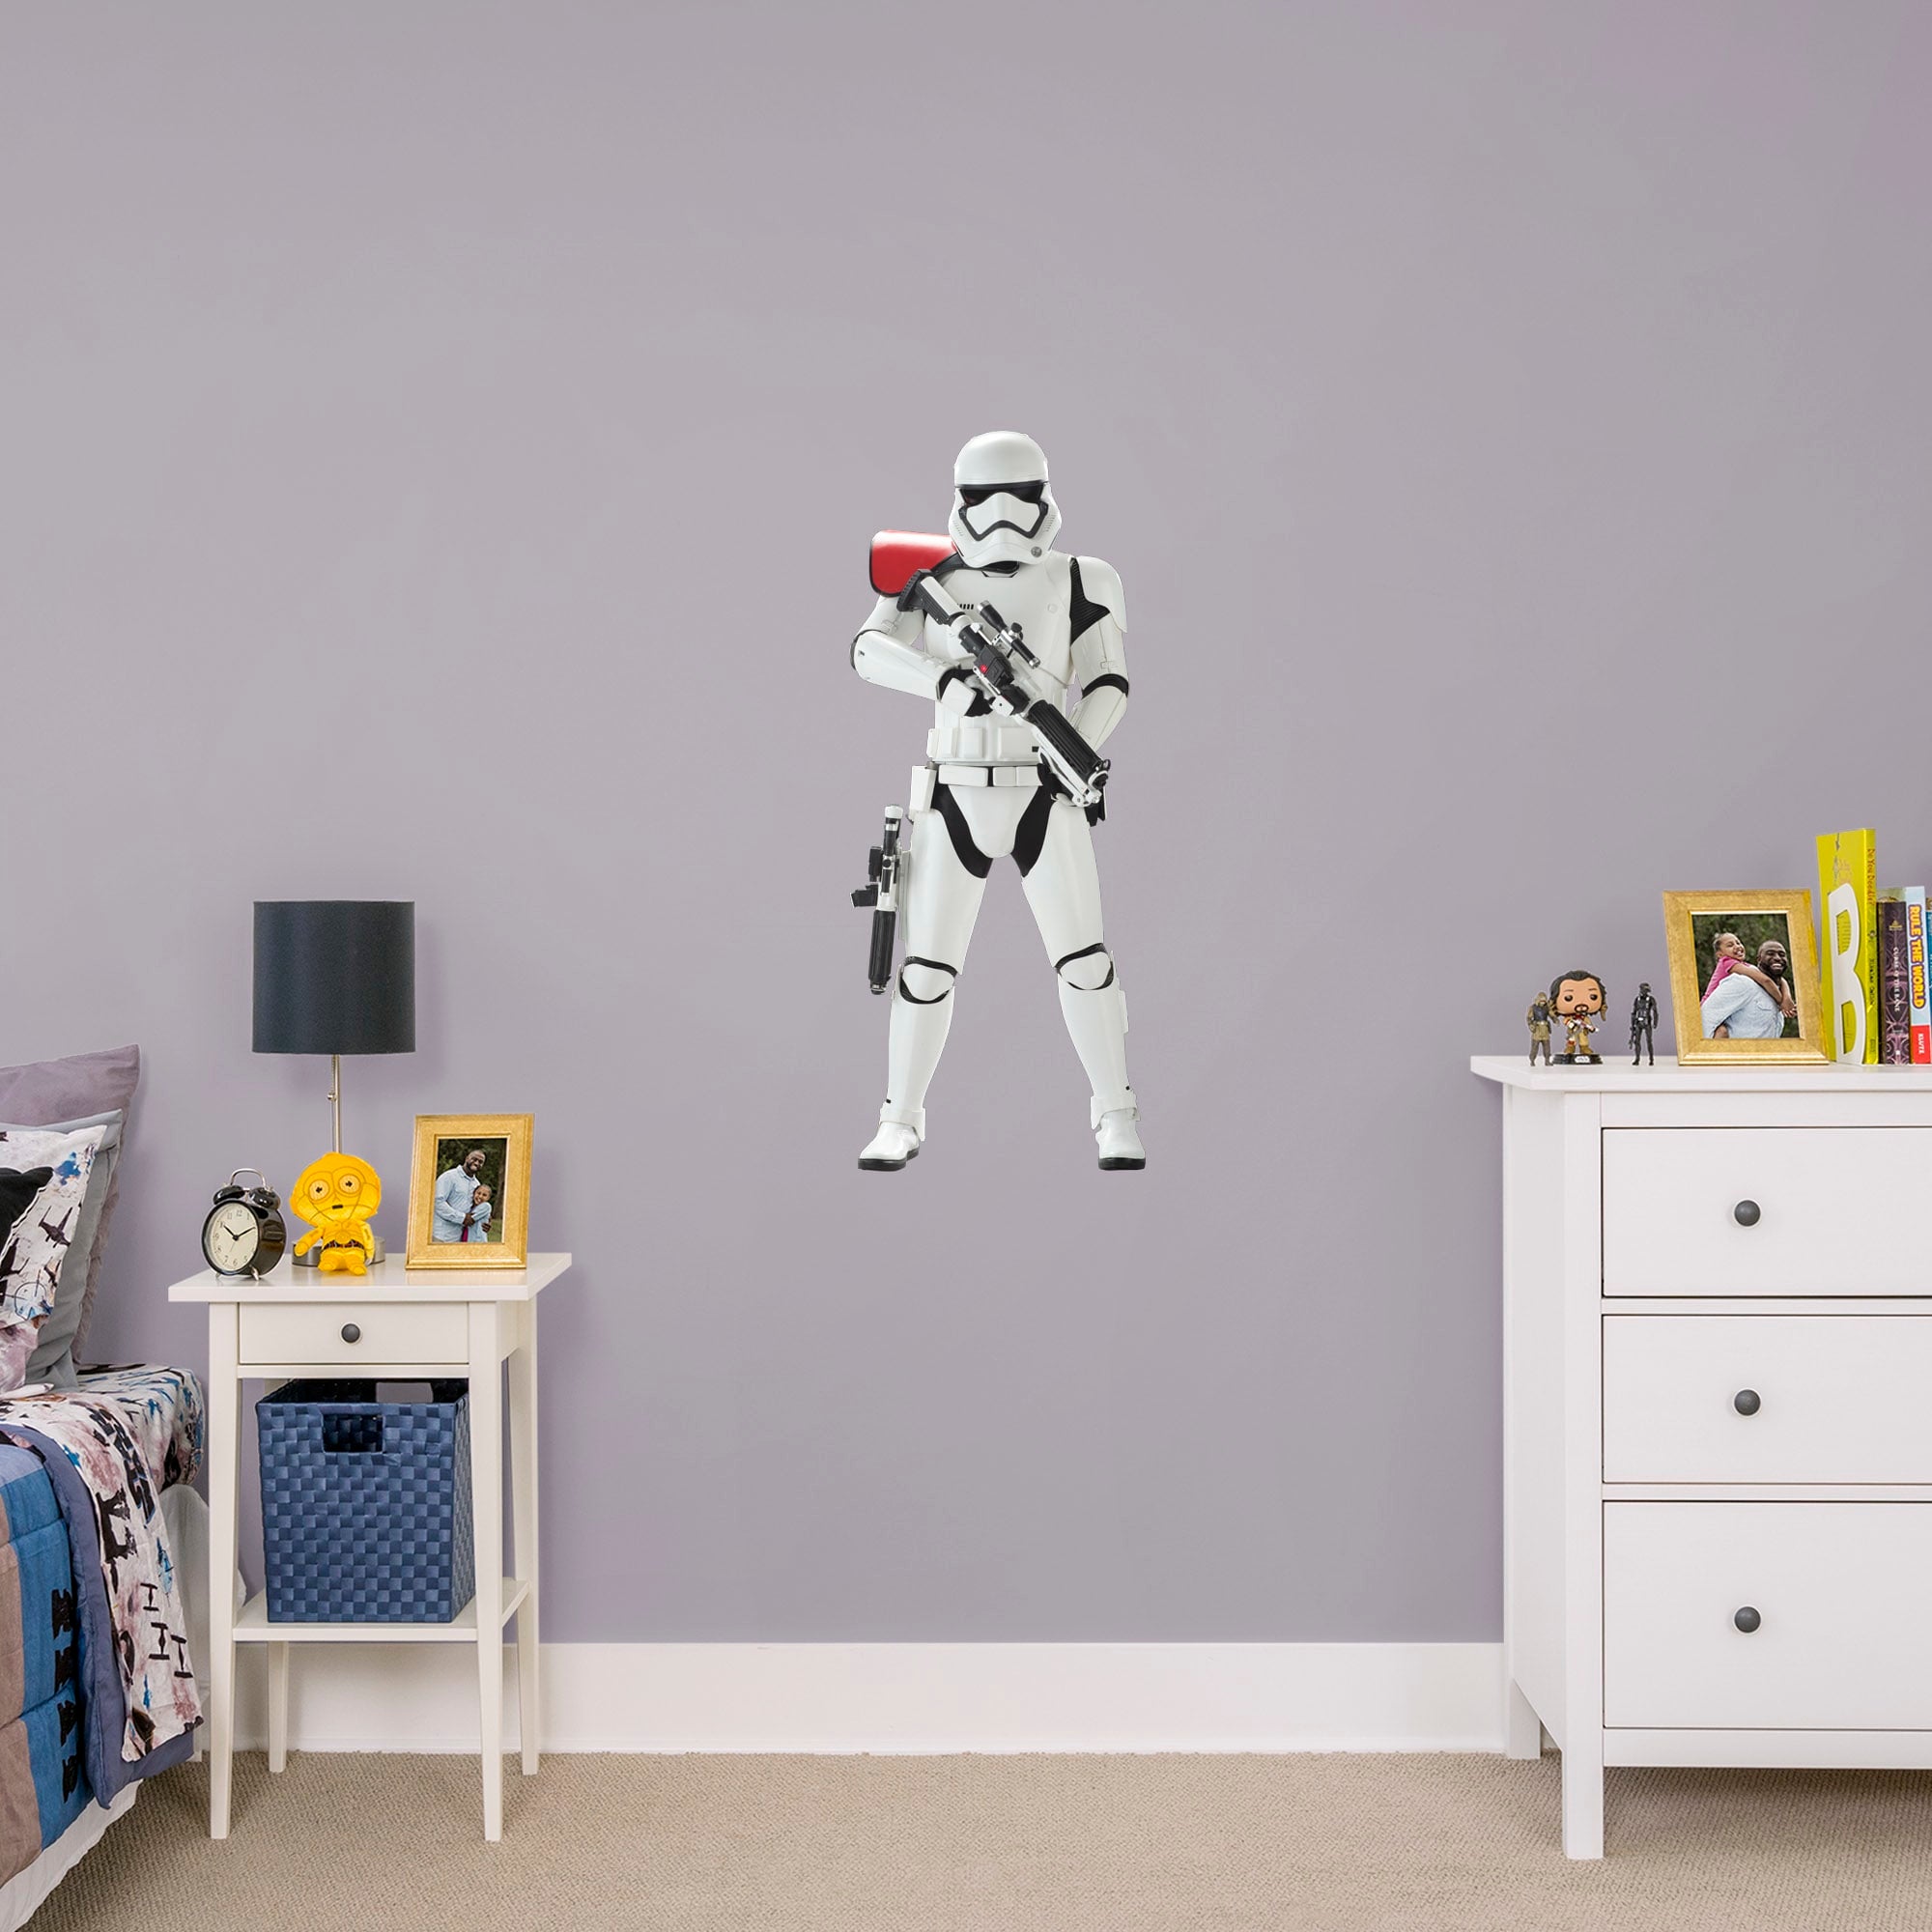 Stormtrooper - Star Wars: The Force Awakens - Officially Licensed Removable Wall Decal XL by Fathead | Vinyl